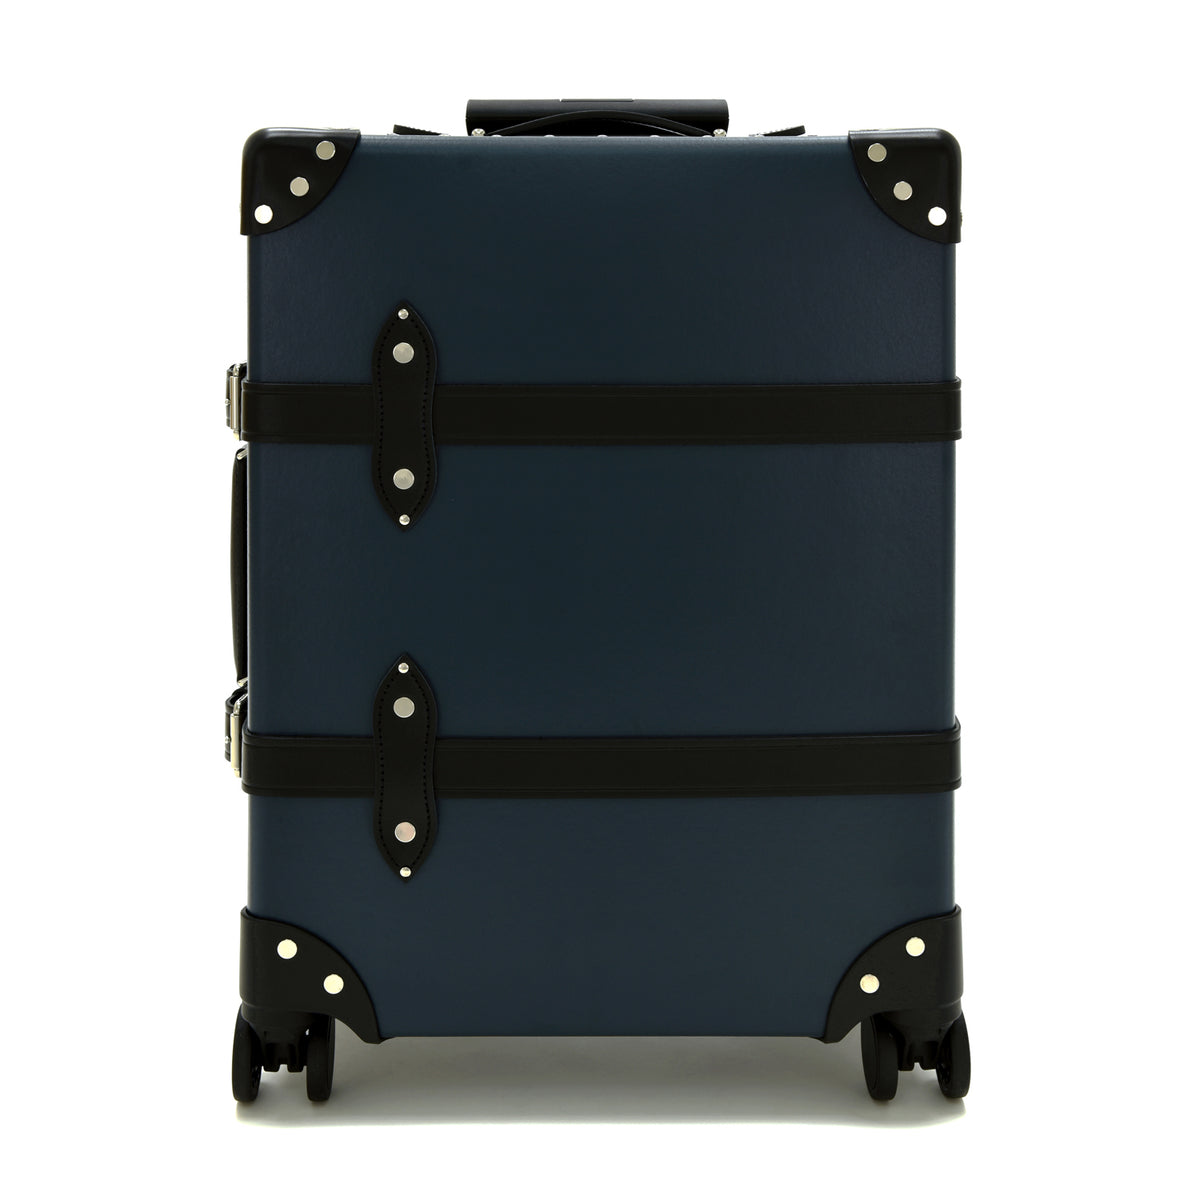 James Bond Carry-On Trolley Case - Dr. No Edition - By Globe-Trotter